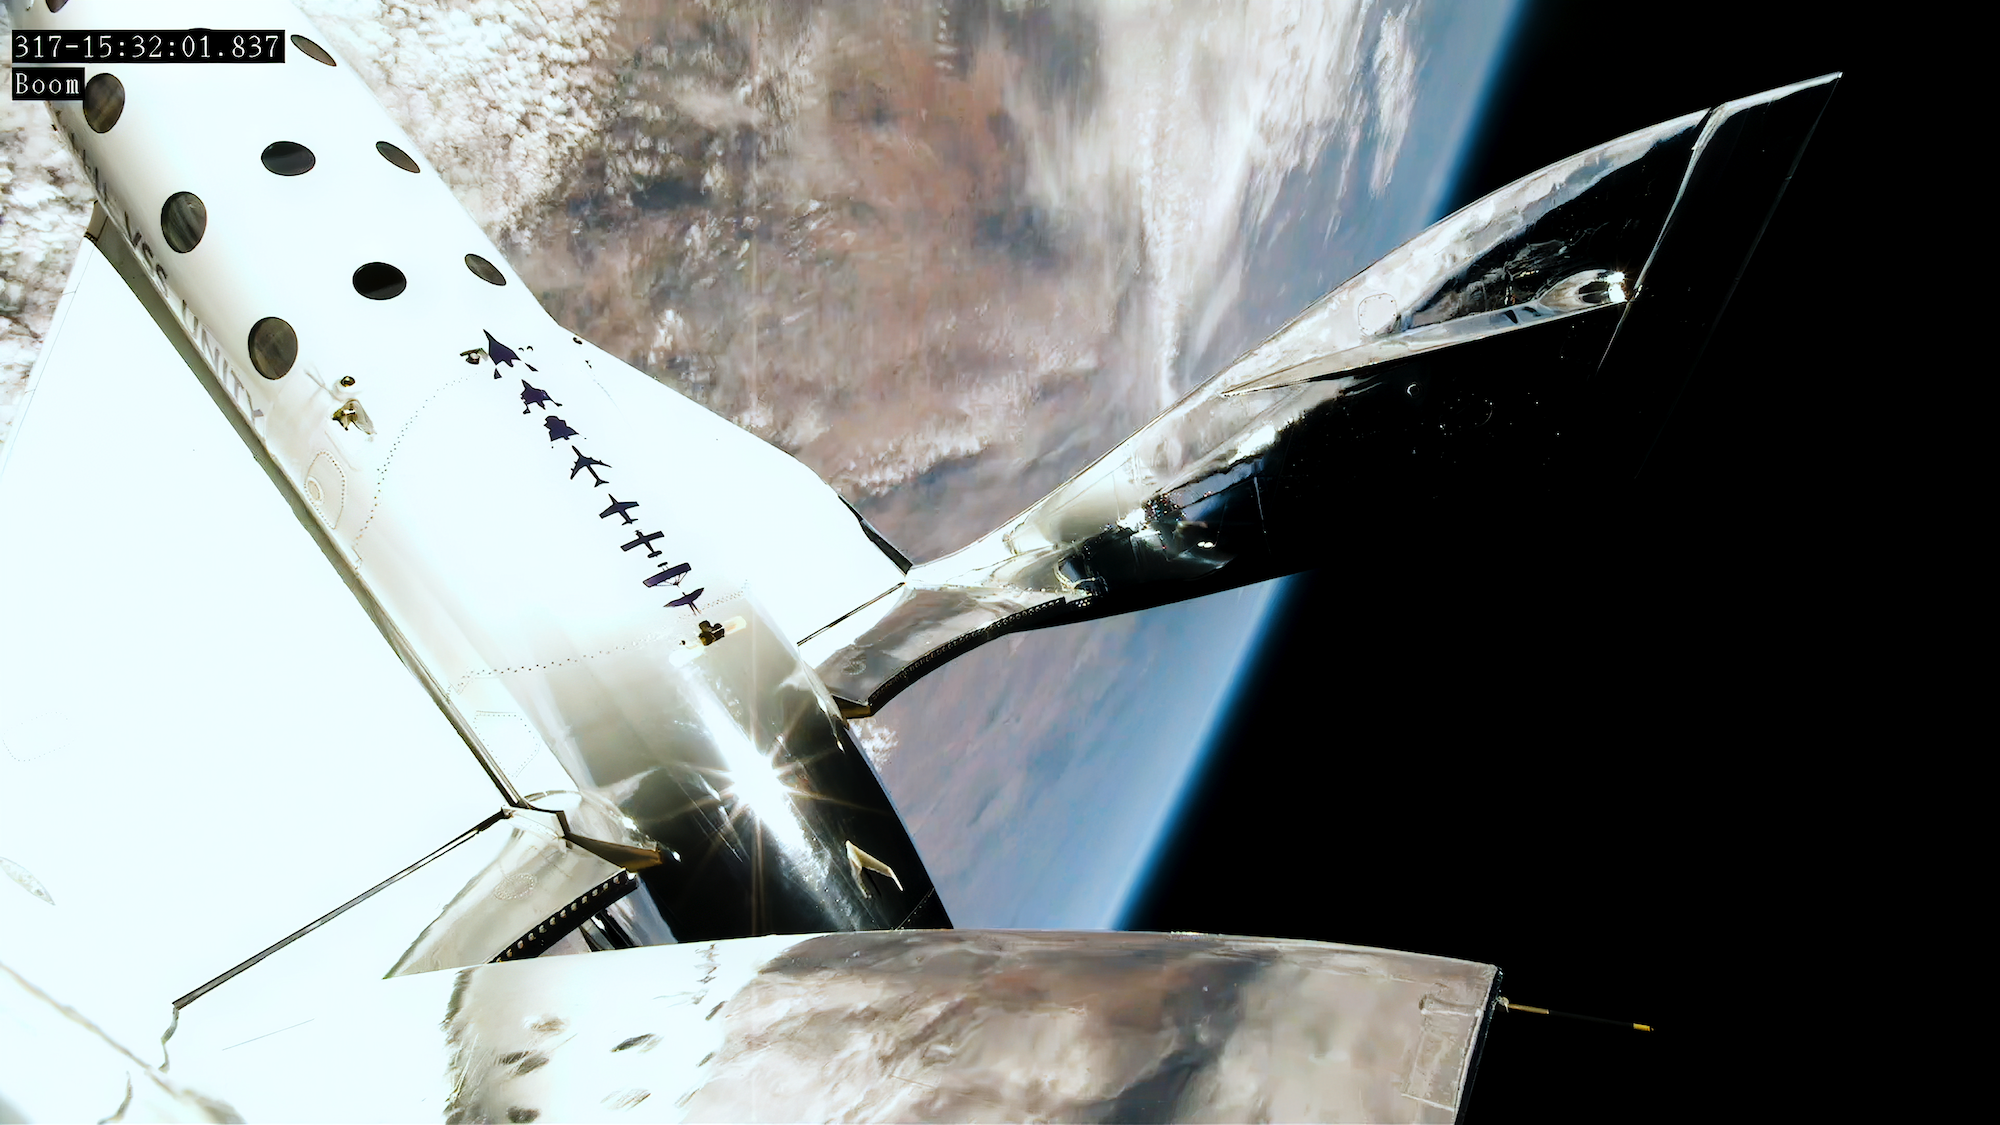 Virgin Galactic’s second commercial flight sent three tourists to space’s edge